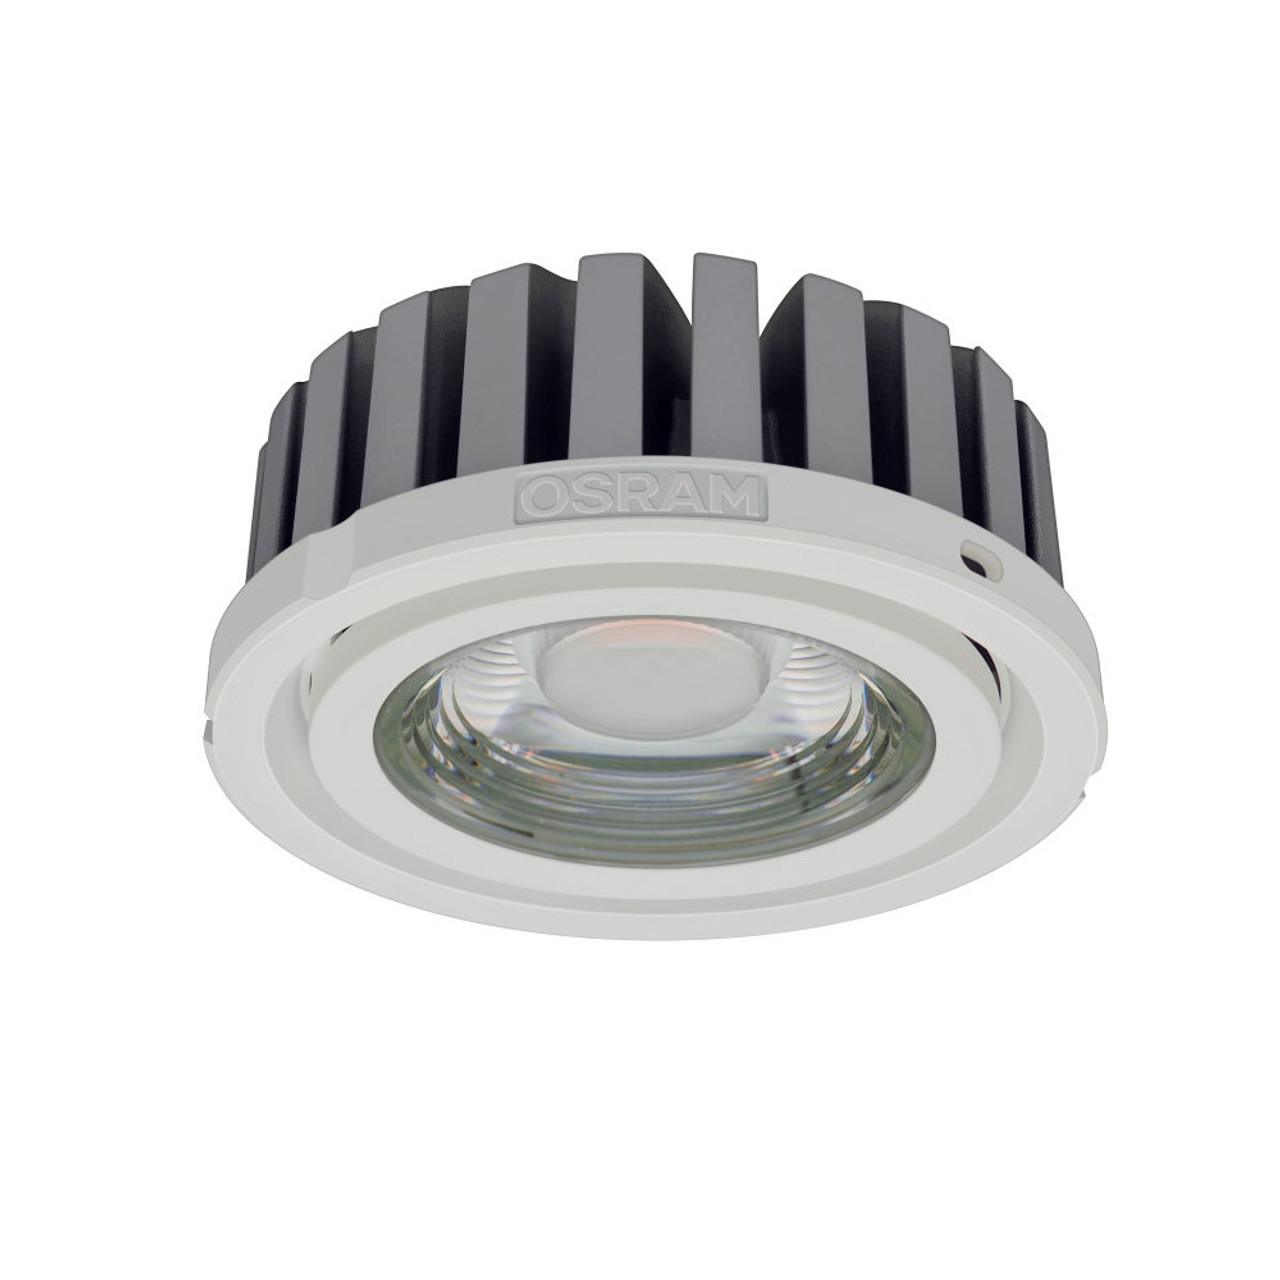 LED 1050mA Constant Current 36.7W Dimmable 6500K 4350lm 24 degrees COB